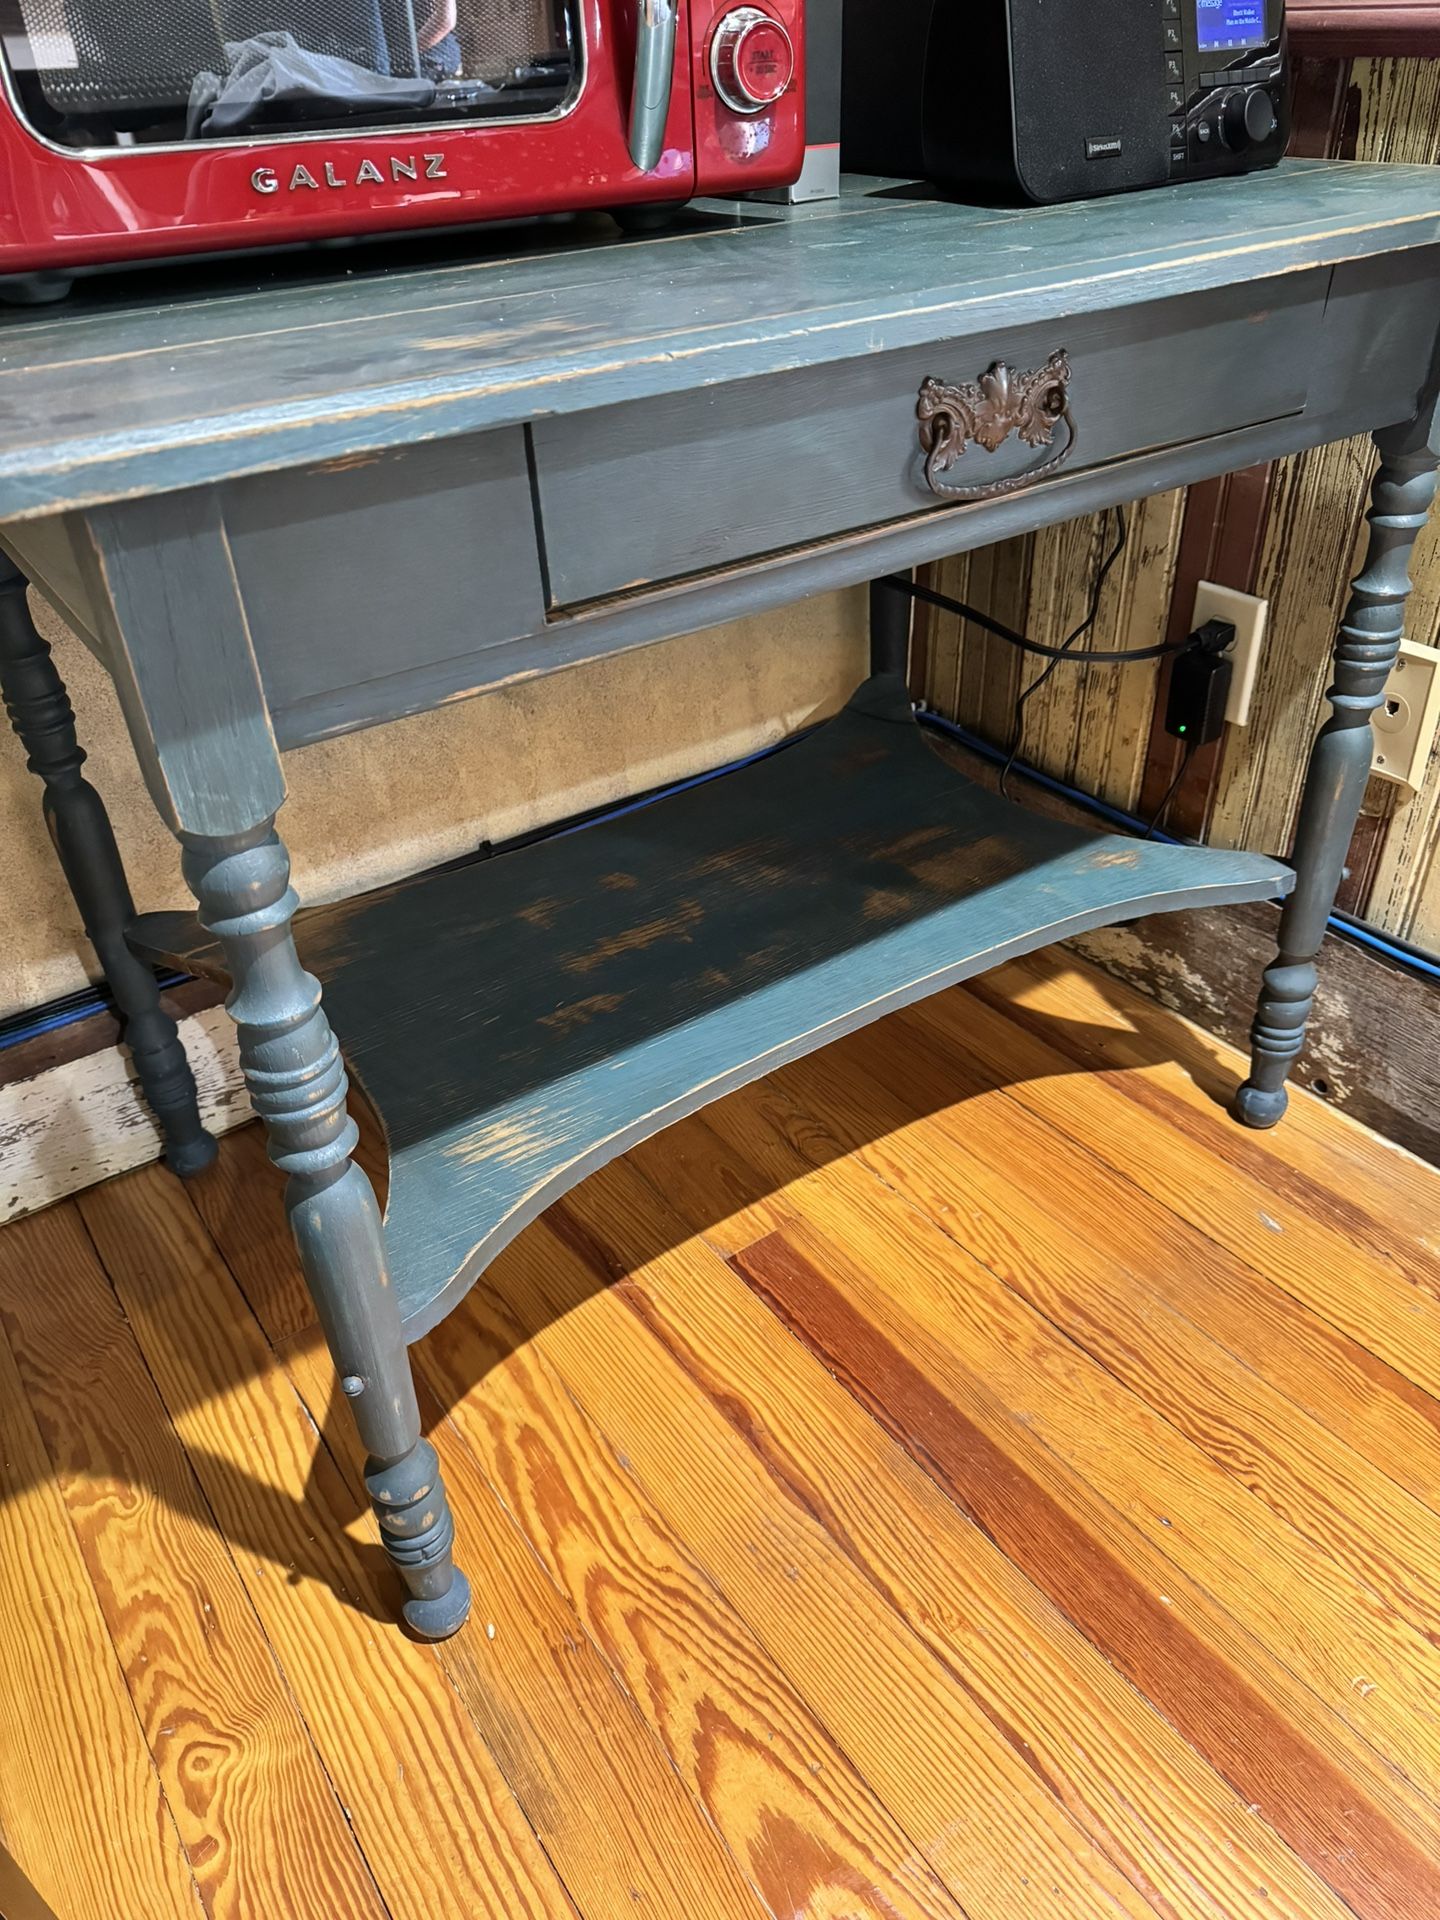 Small Teal vintage Table Purchased At Antique Mall